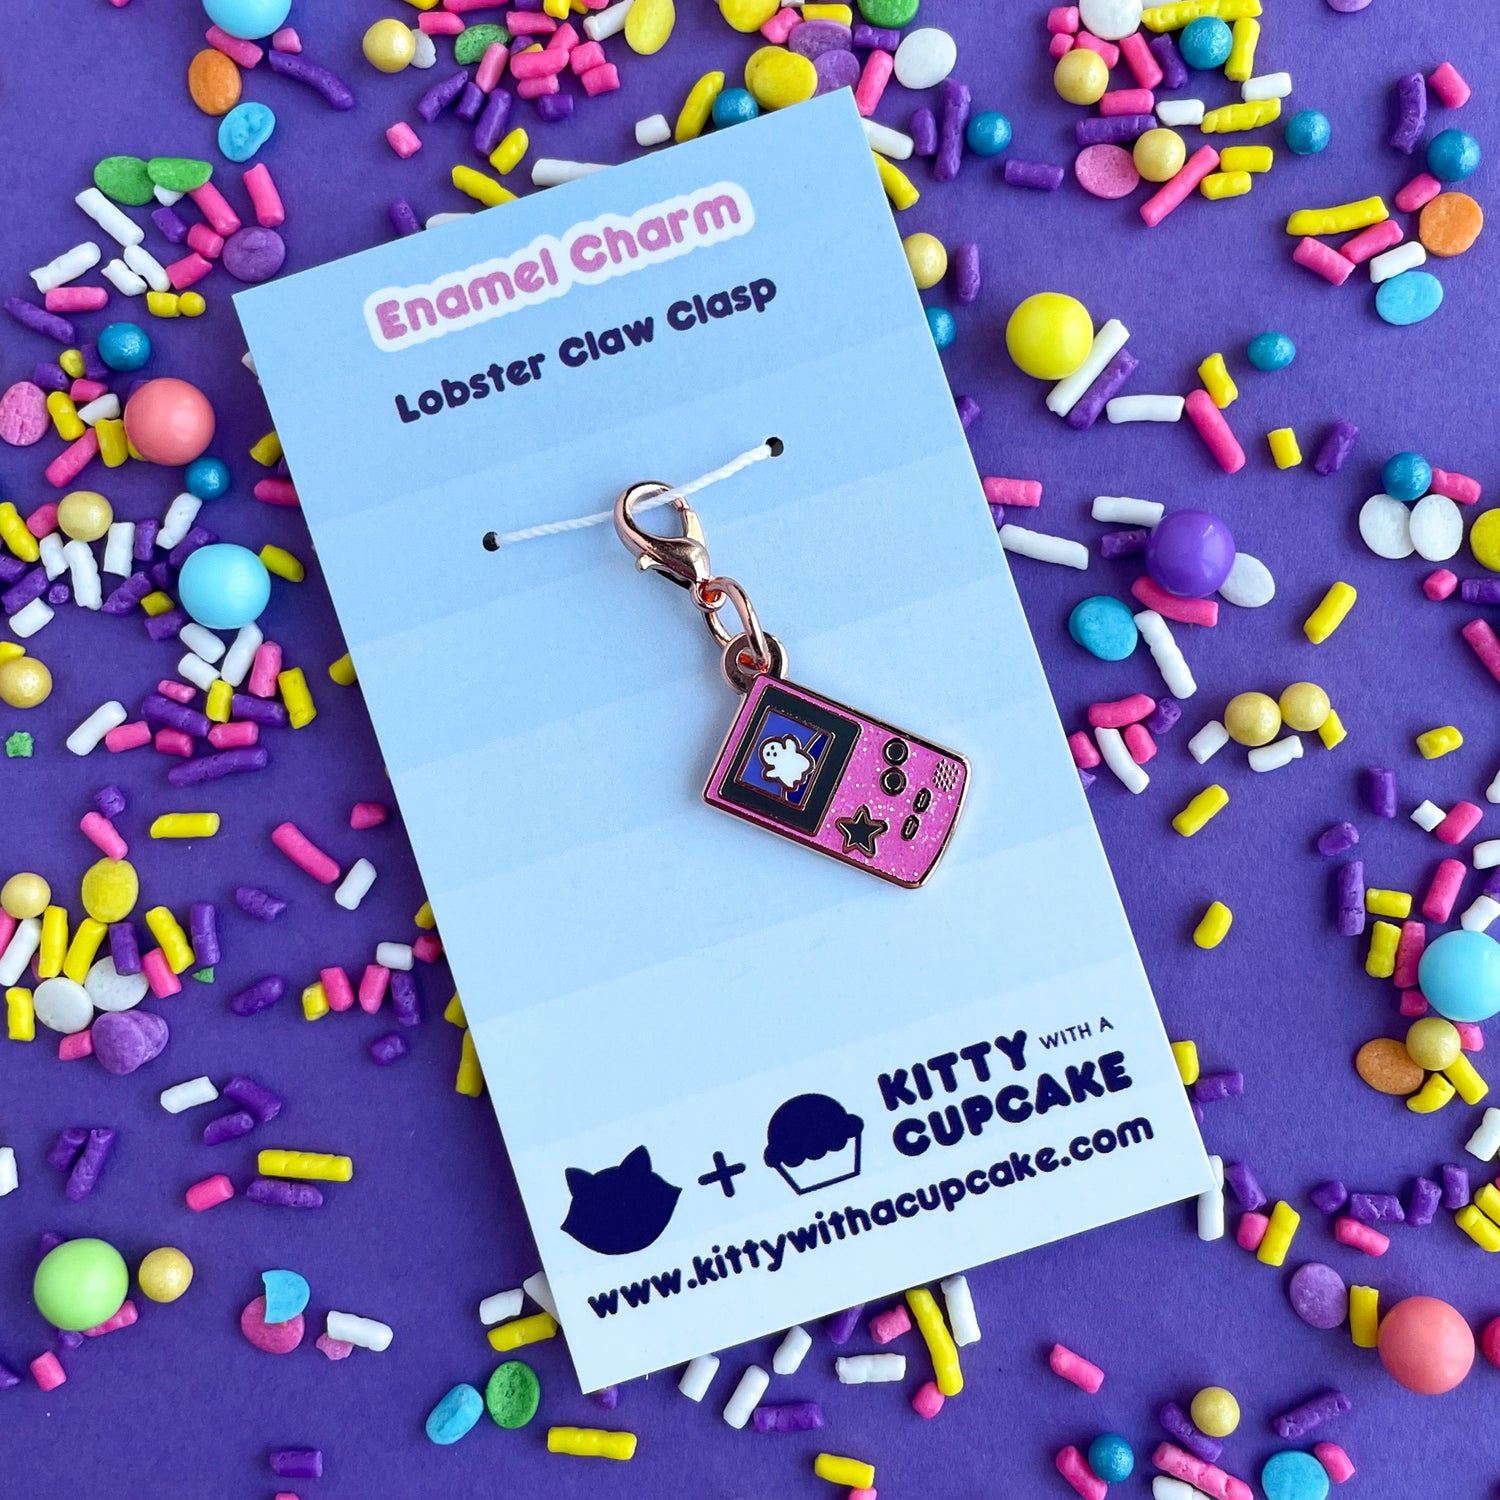 A lobster claw clasp charm that is the shape of a pink glitter Game Boy with a star button and a cute ghost on the screen. The charm is packaged on a backing card that reads "Enamel Charm - Lobster Claw Clasp". It is on a purple background that is covered in pastel sprinkles.